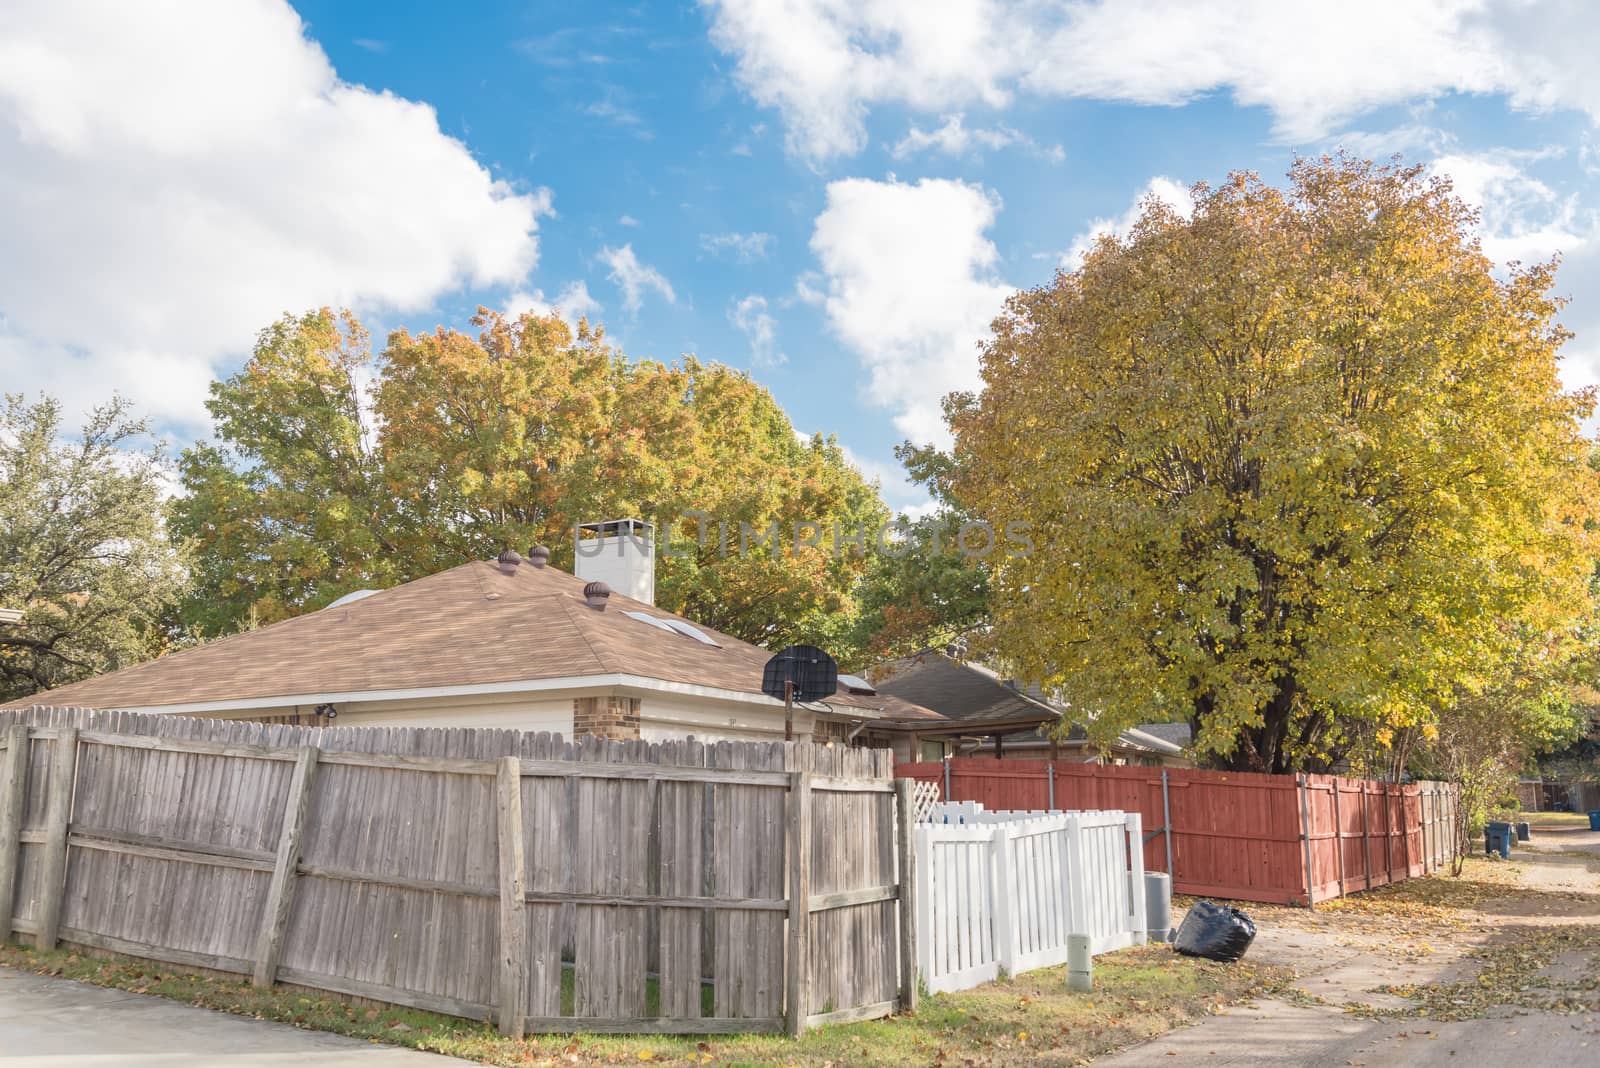 Beautiful backyard of typical residential house with wooden fence in suburbs of Dallas during fall season. Colorful mature trees and floor of fallen dried leaves, cloud blue sky